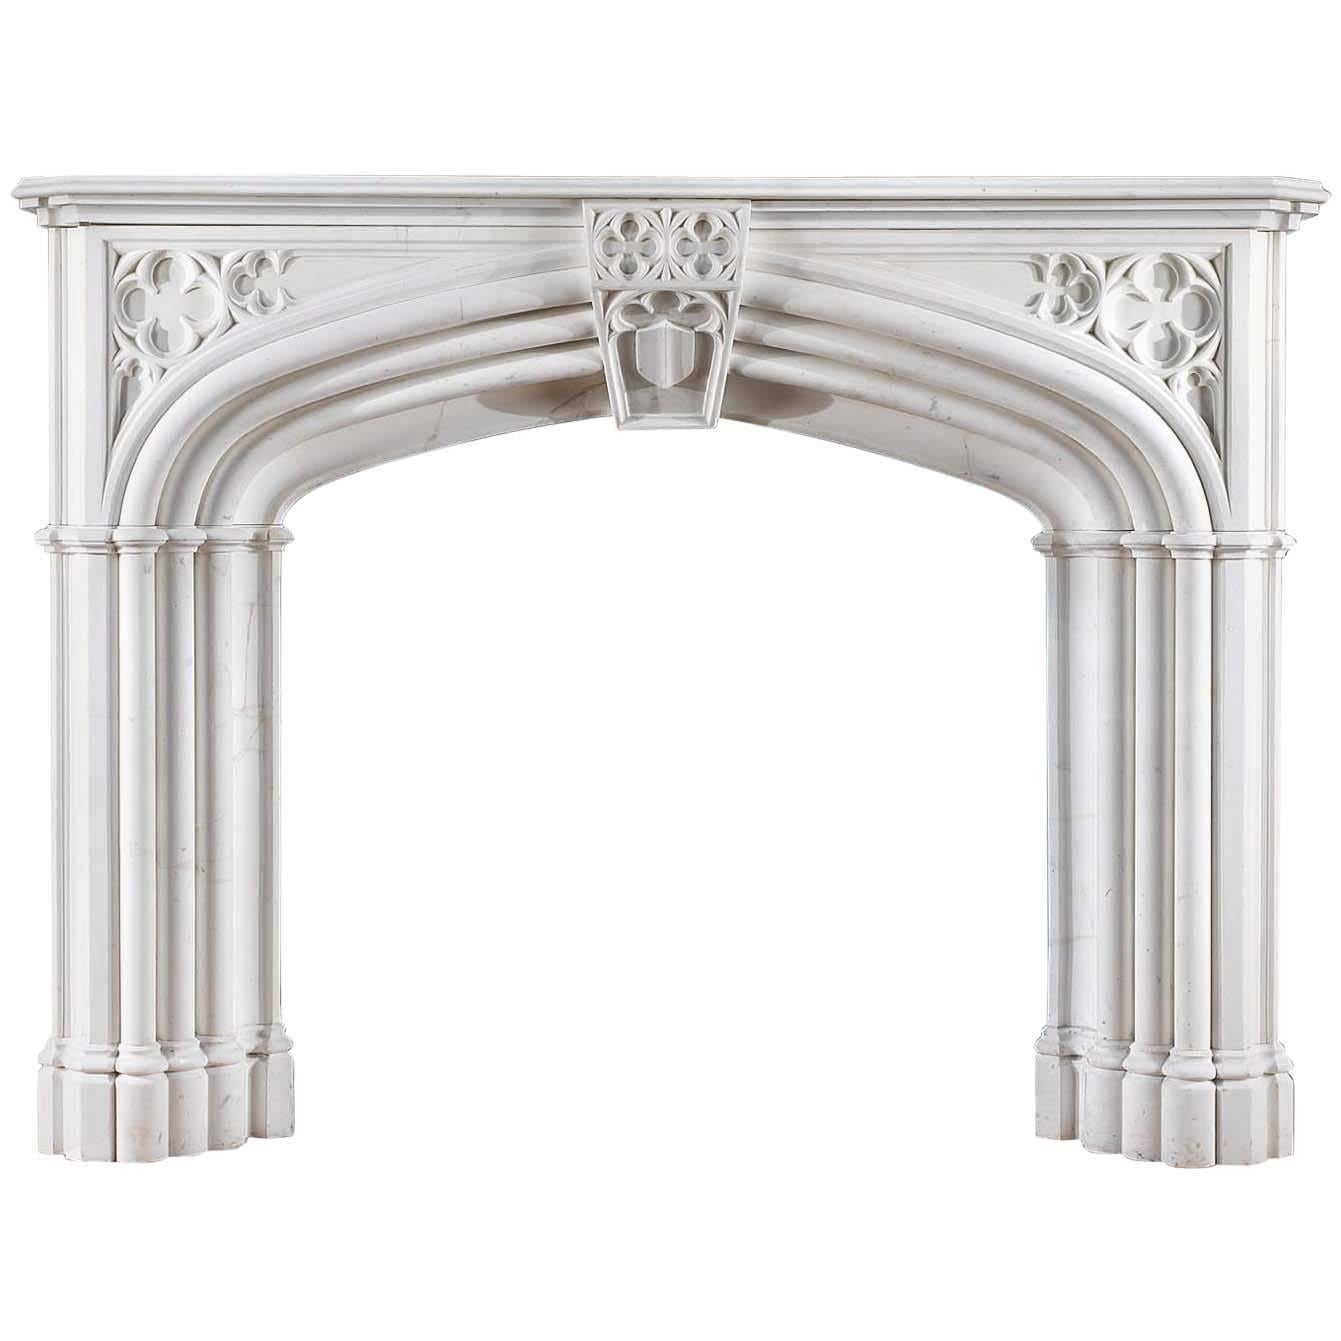 White Statuary Marble Gothic Revival Chimneypiece